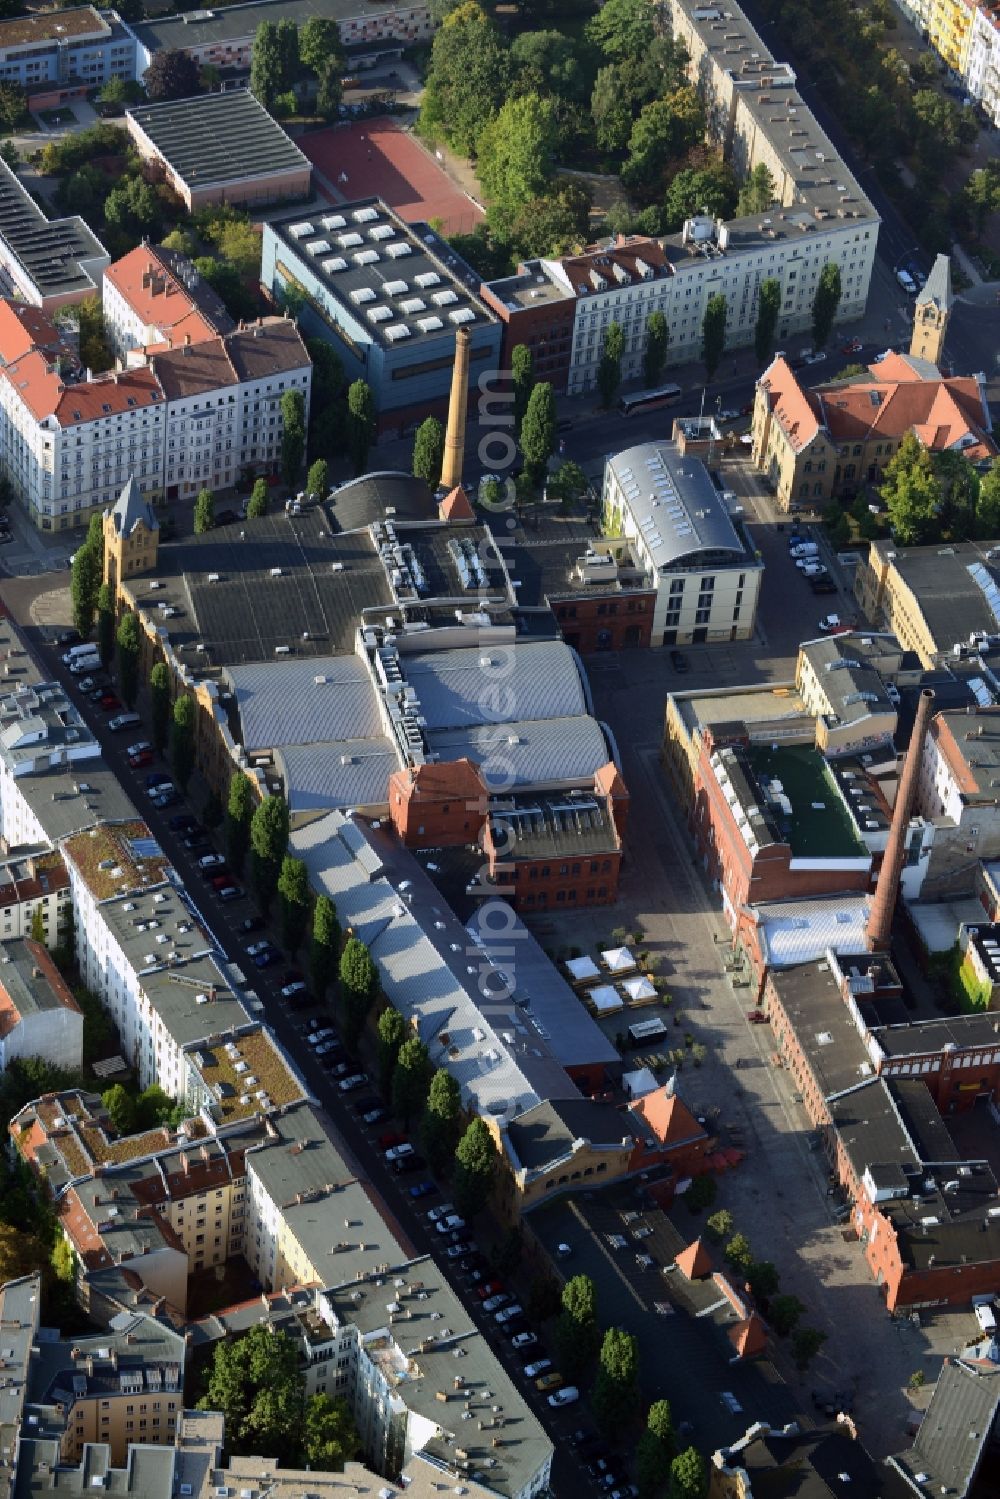 Berlin Prenzlauer Berg from above - Kulturbrauerei Berlin evolved from a brewery to a cultural place. It contains a cinema, theatre, rehearsal rooms, and venues like the so called Kesselhaus or Frannz Klub and much more. It is situated near Schoenhauser Allee